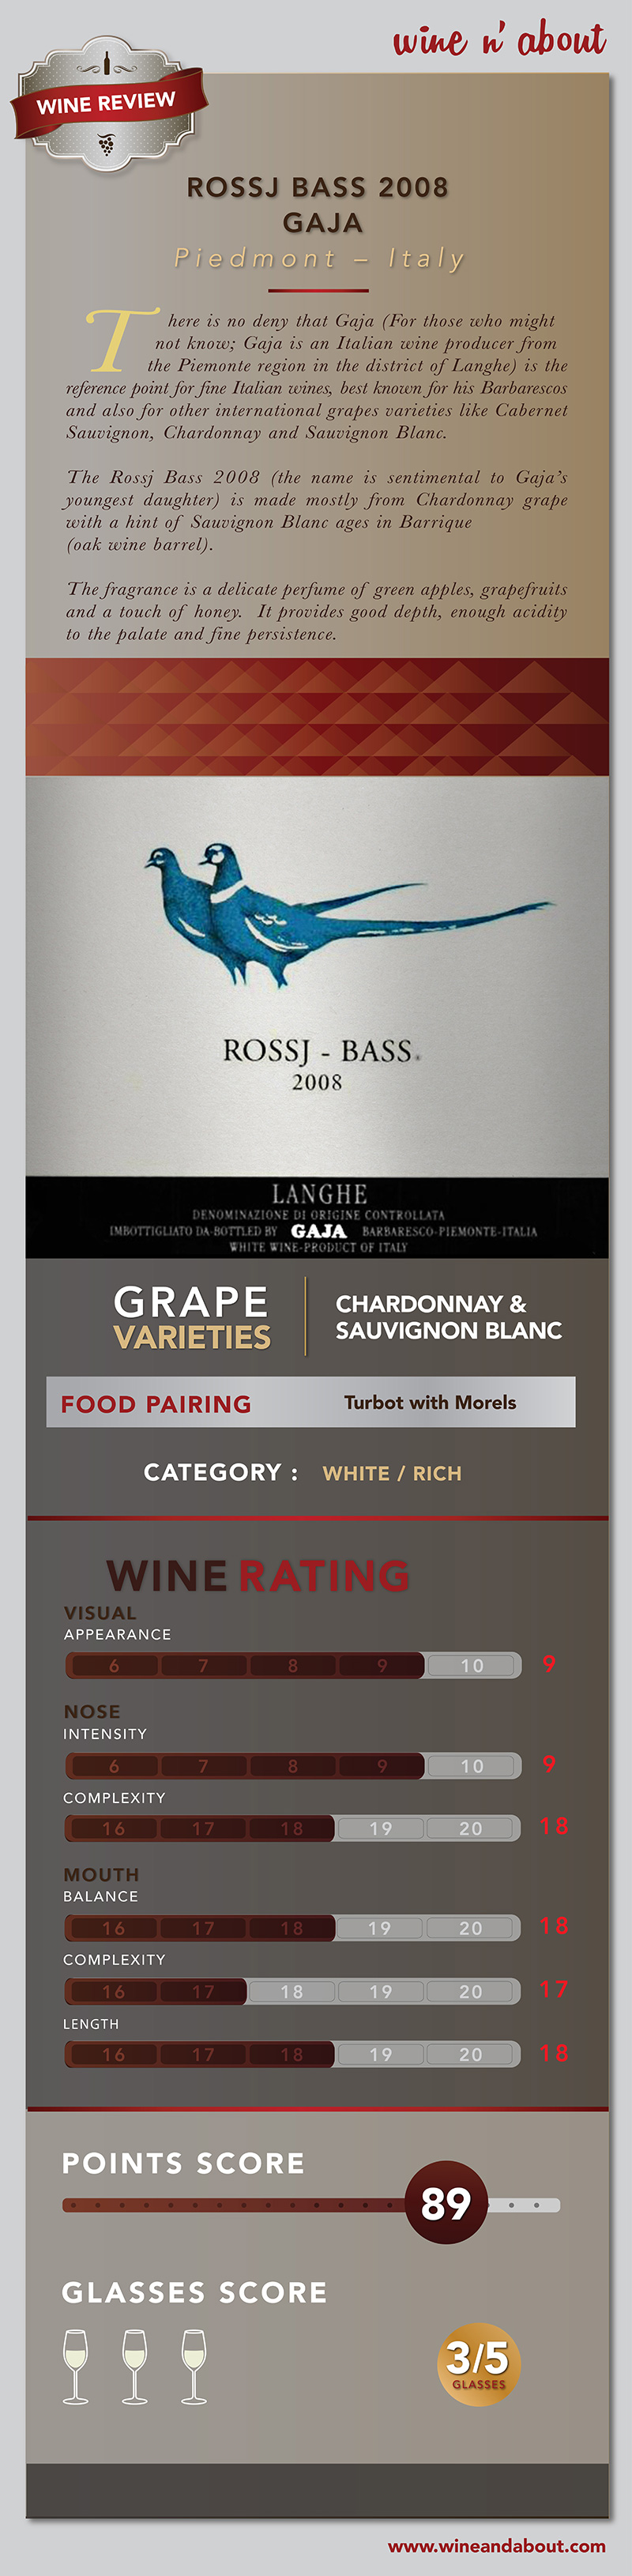 ROSSJ-BASS-2008-wine review-info graphic-from-Phai-Mar-31-Final-Version-Resize-to Scott